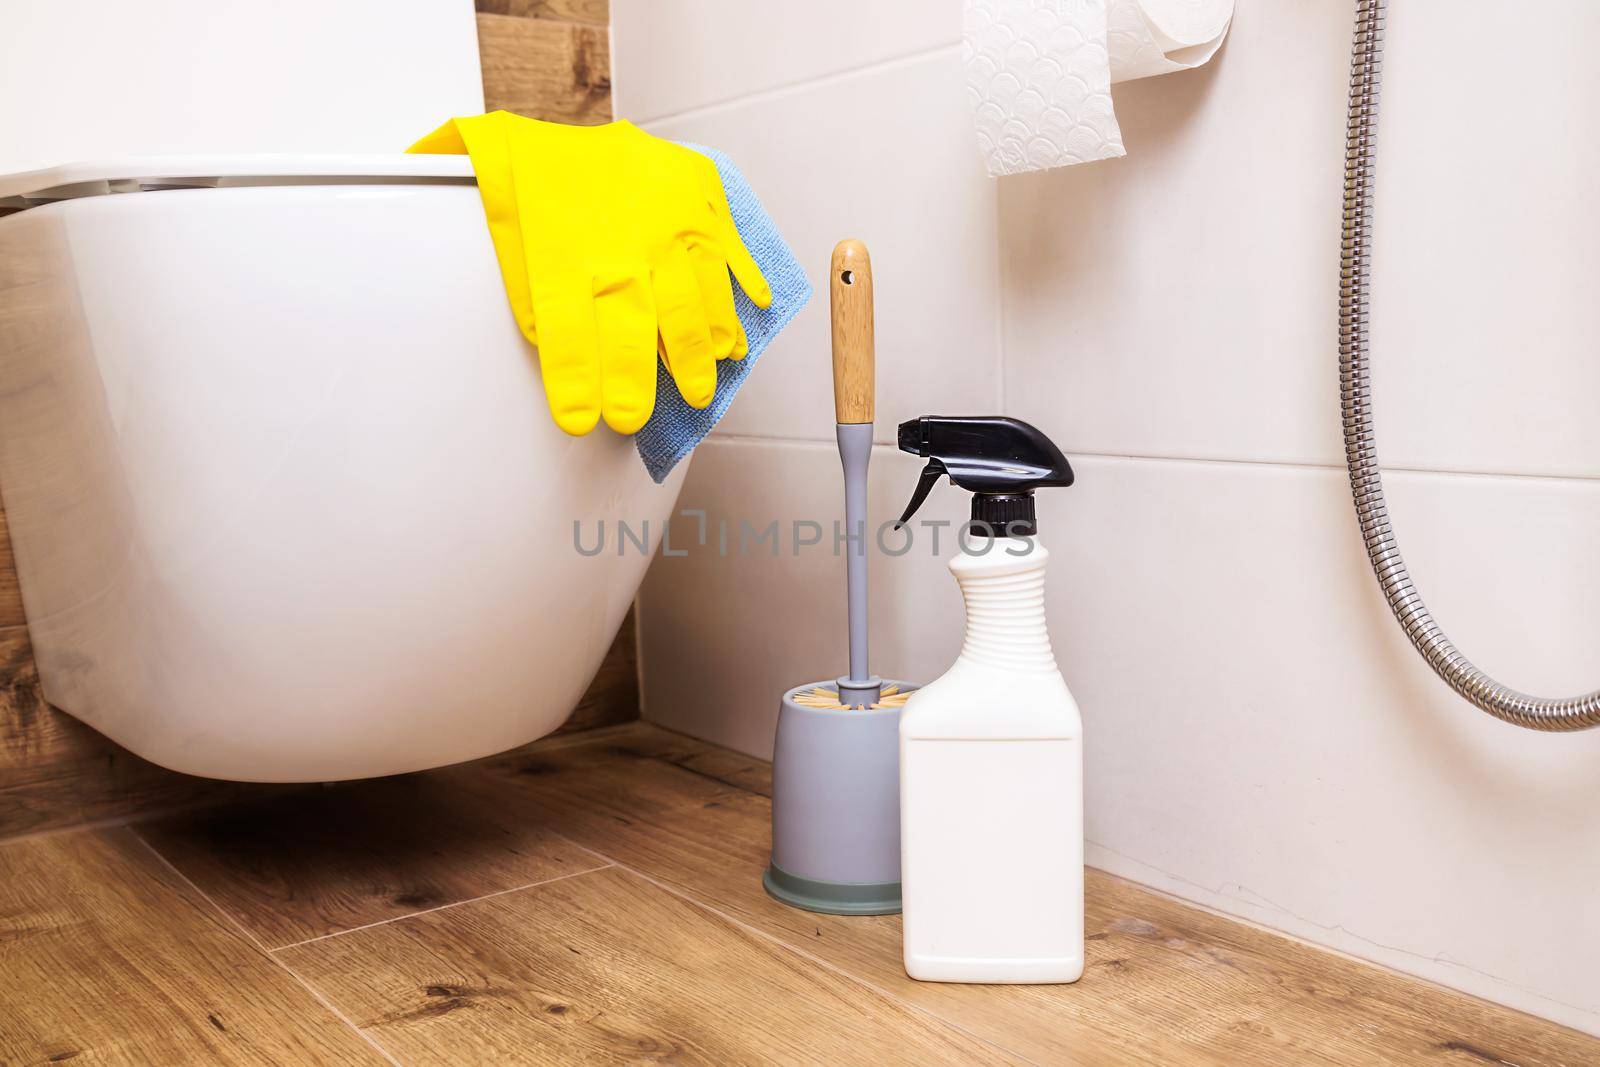 Bathroom cleaner bottle mockup with toilet background, house cleaning concept by Ramanouskaya